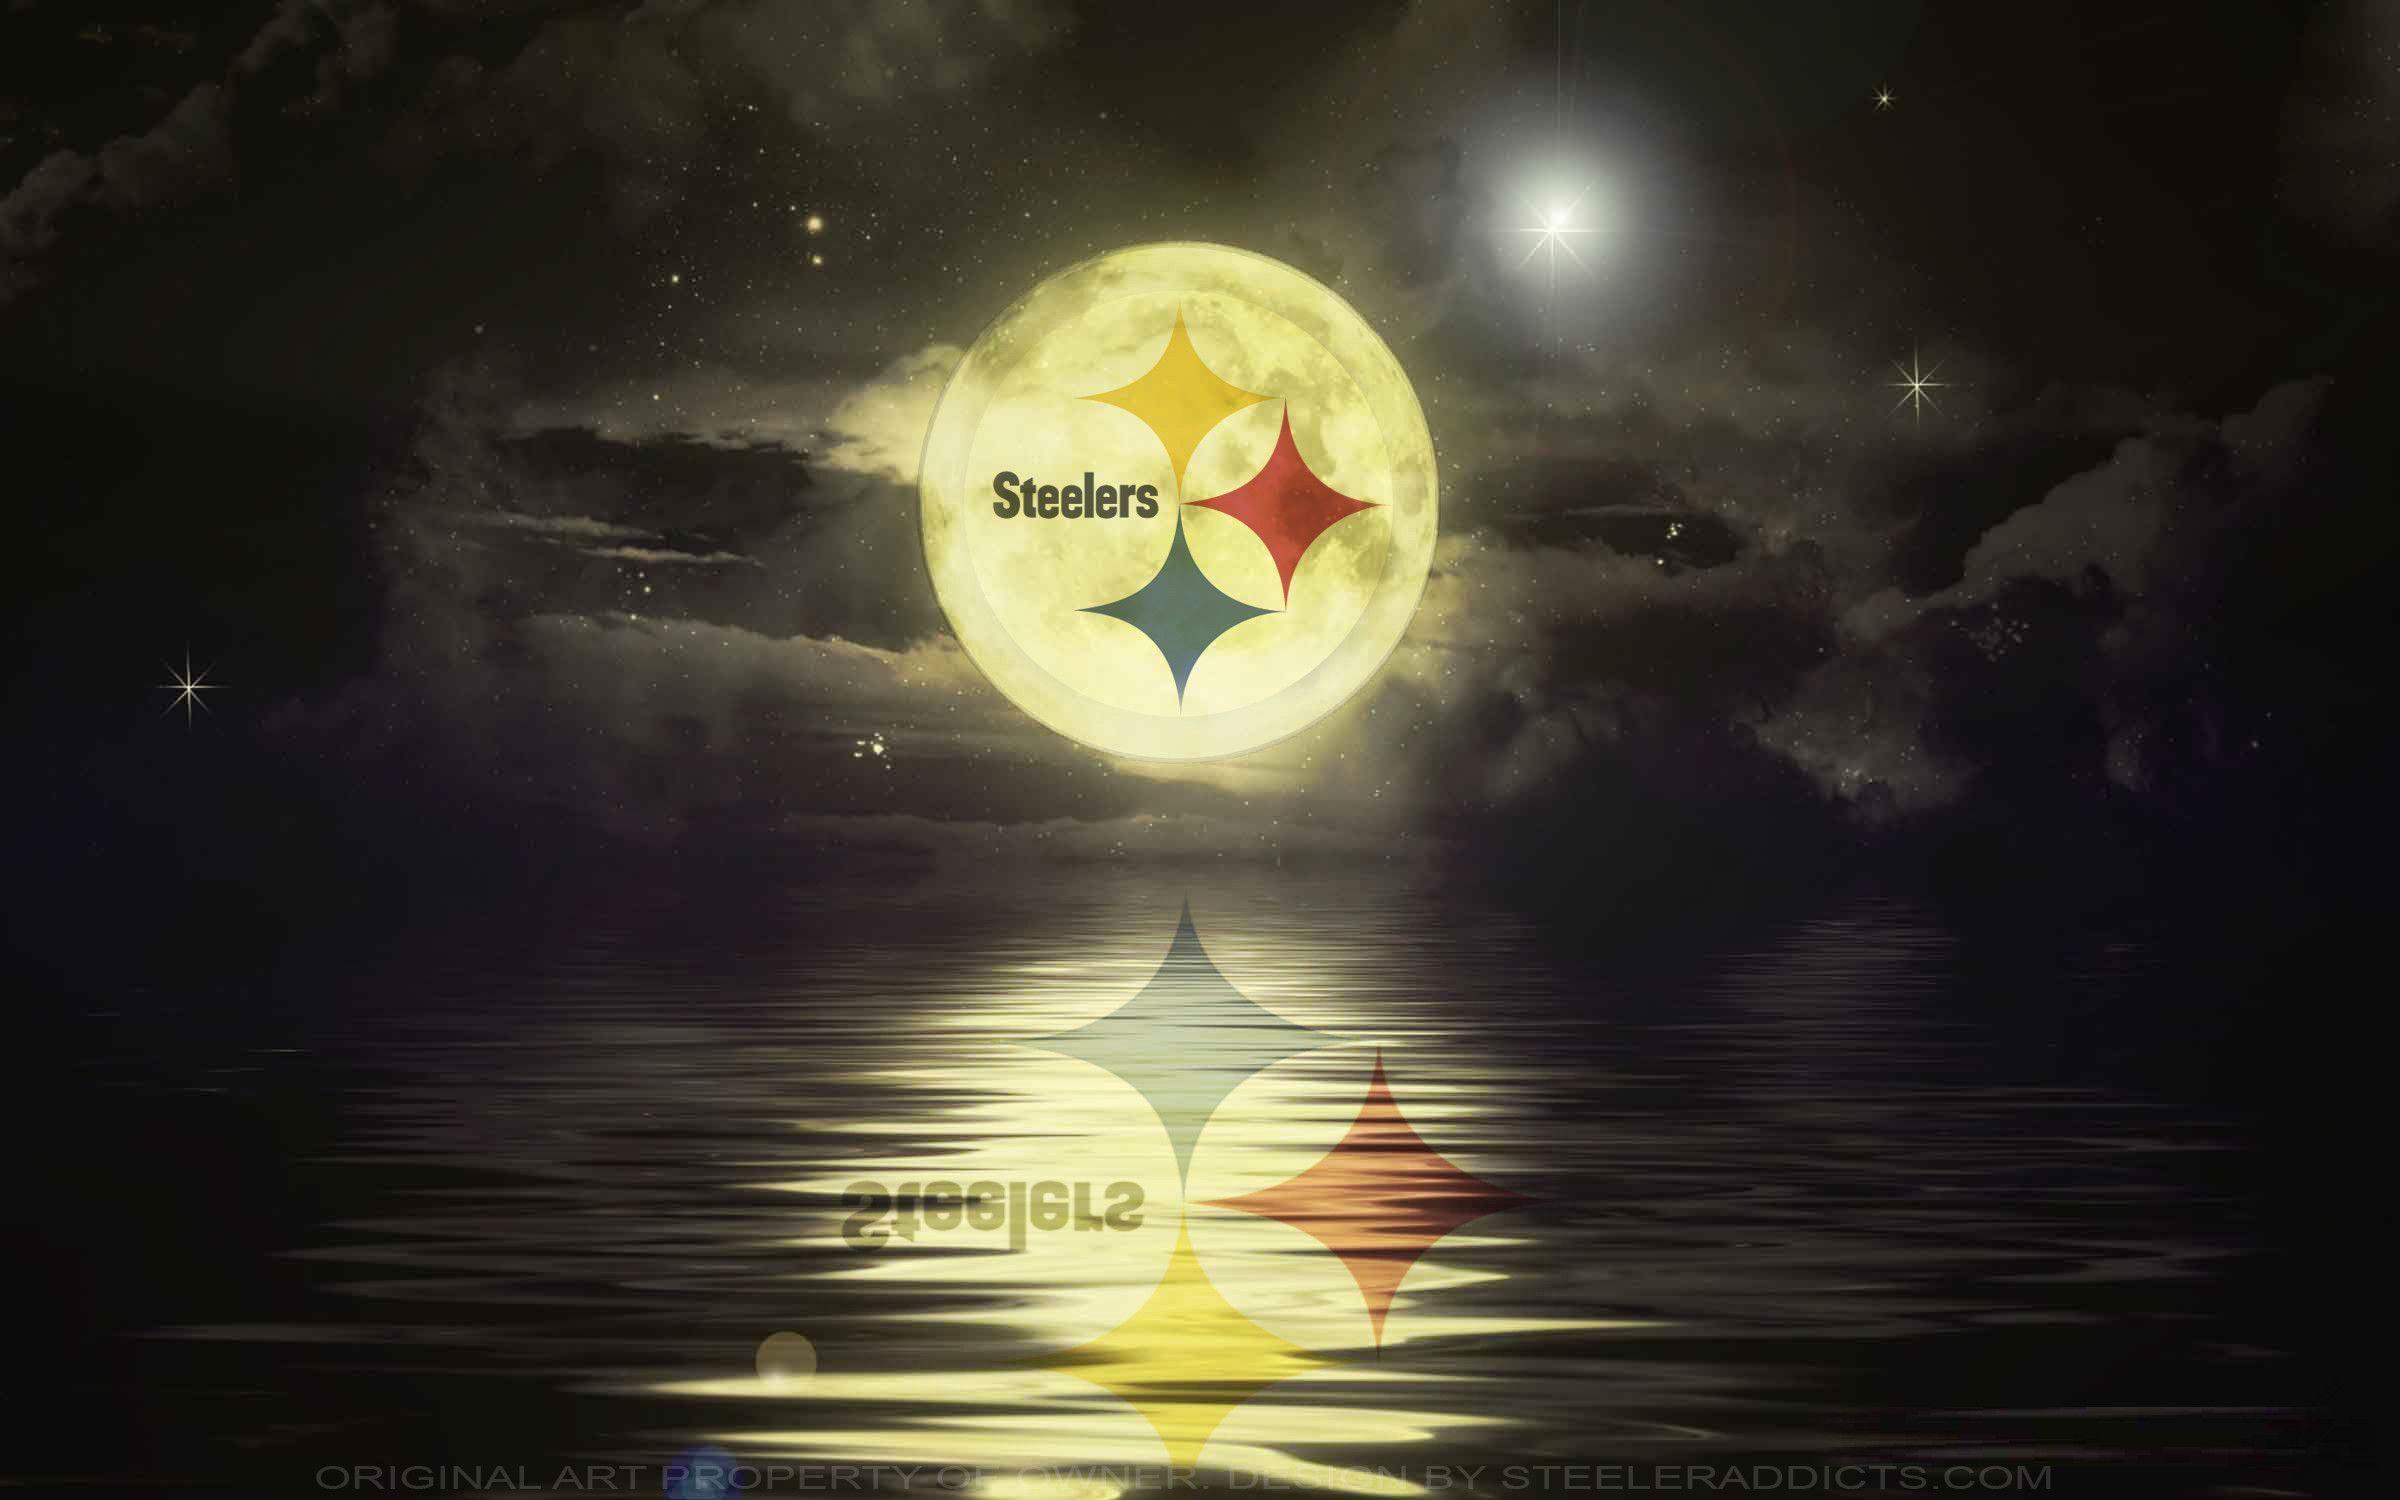 More Steelers Wallpapers loaded up